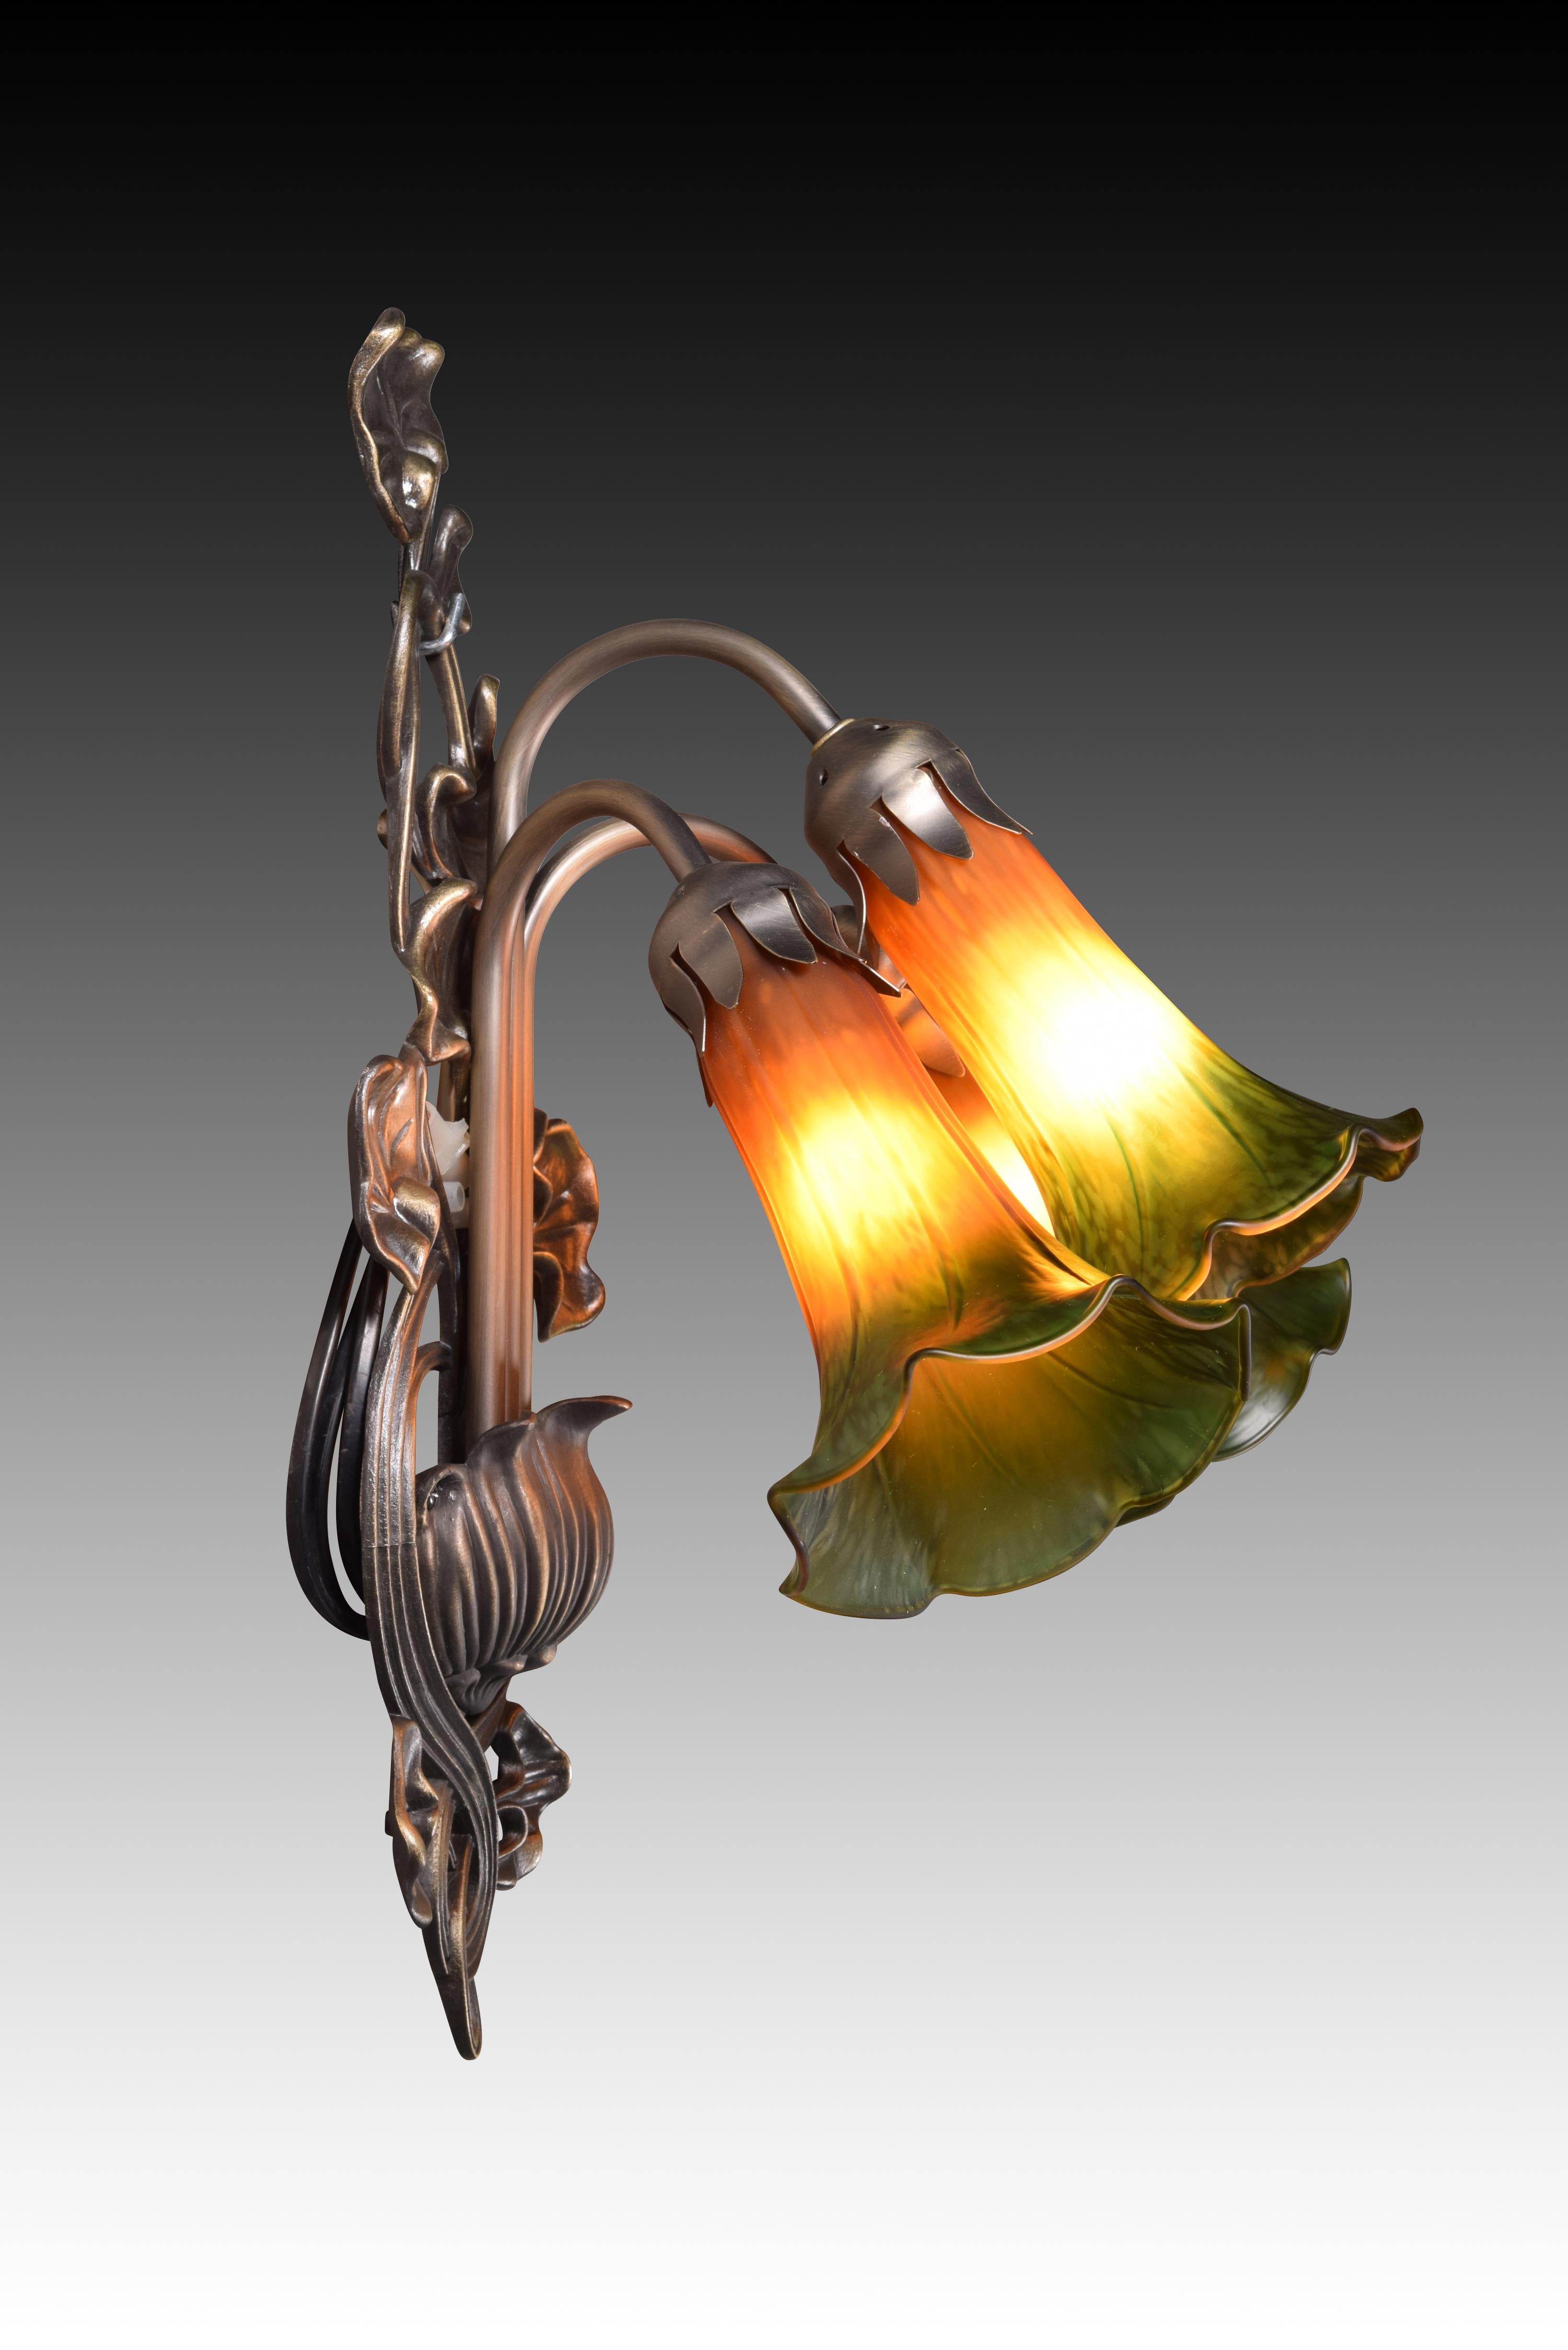 20th Century Wall sconce or lamp, after Art Dèco.